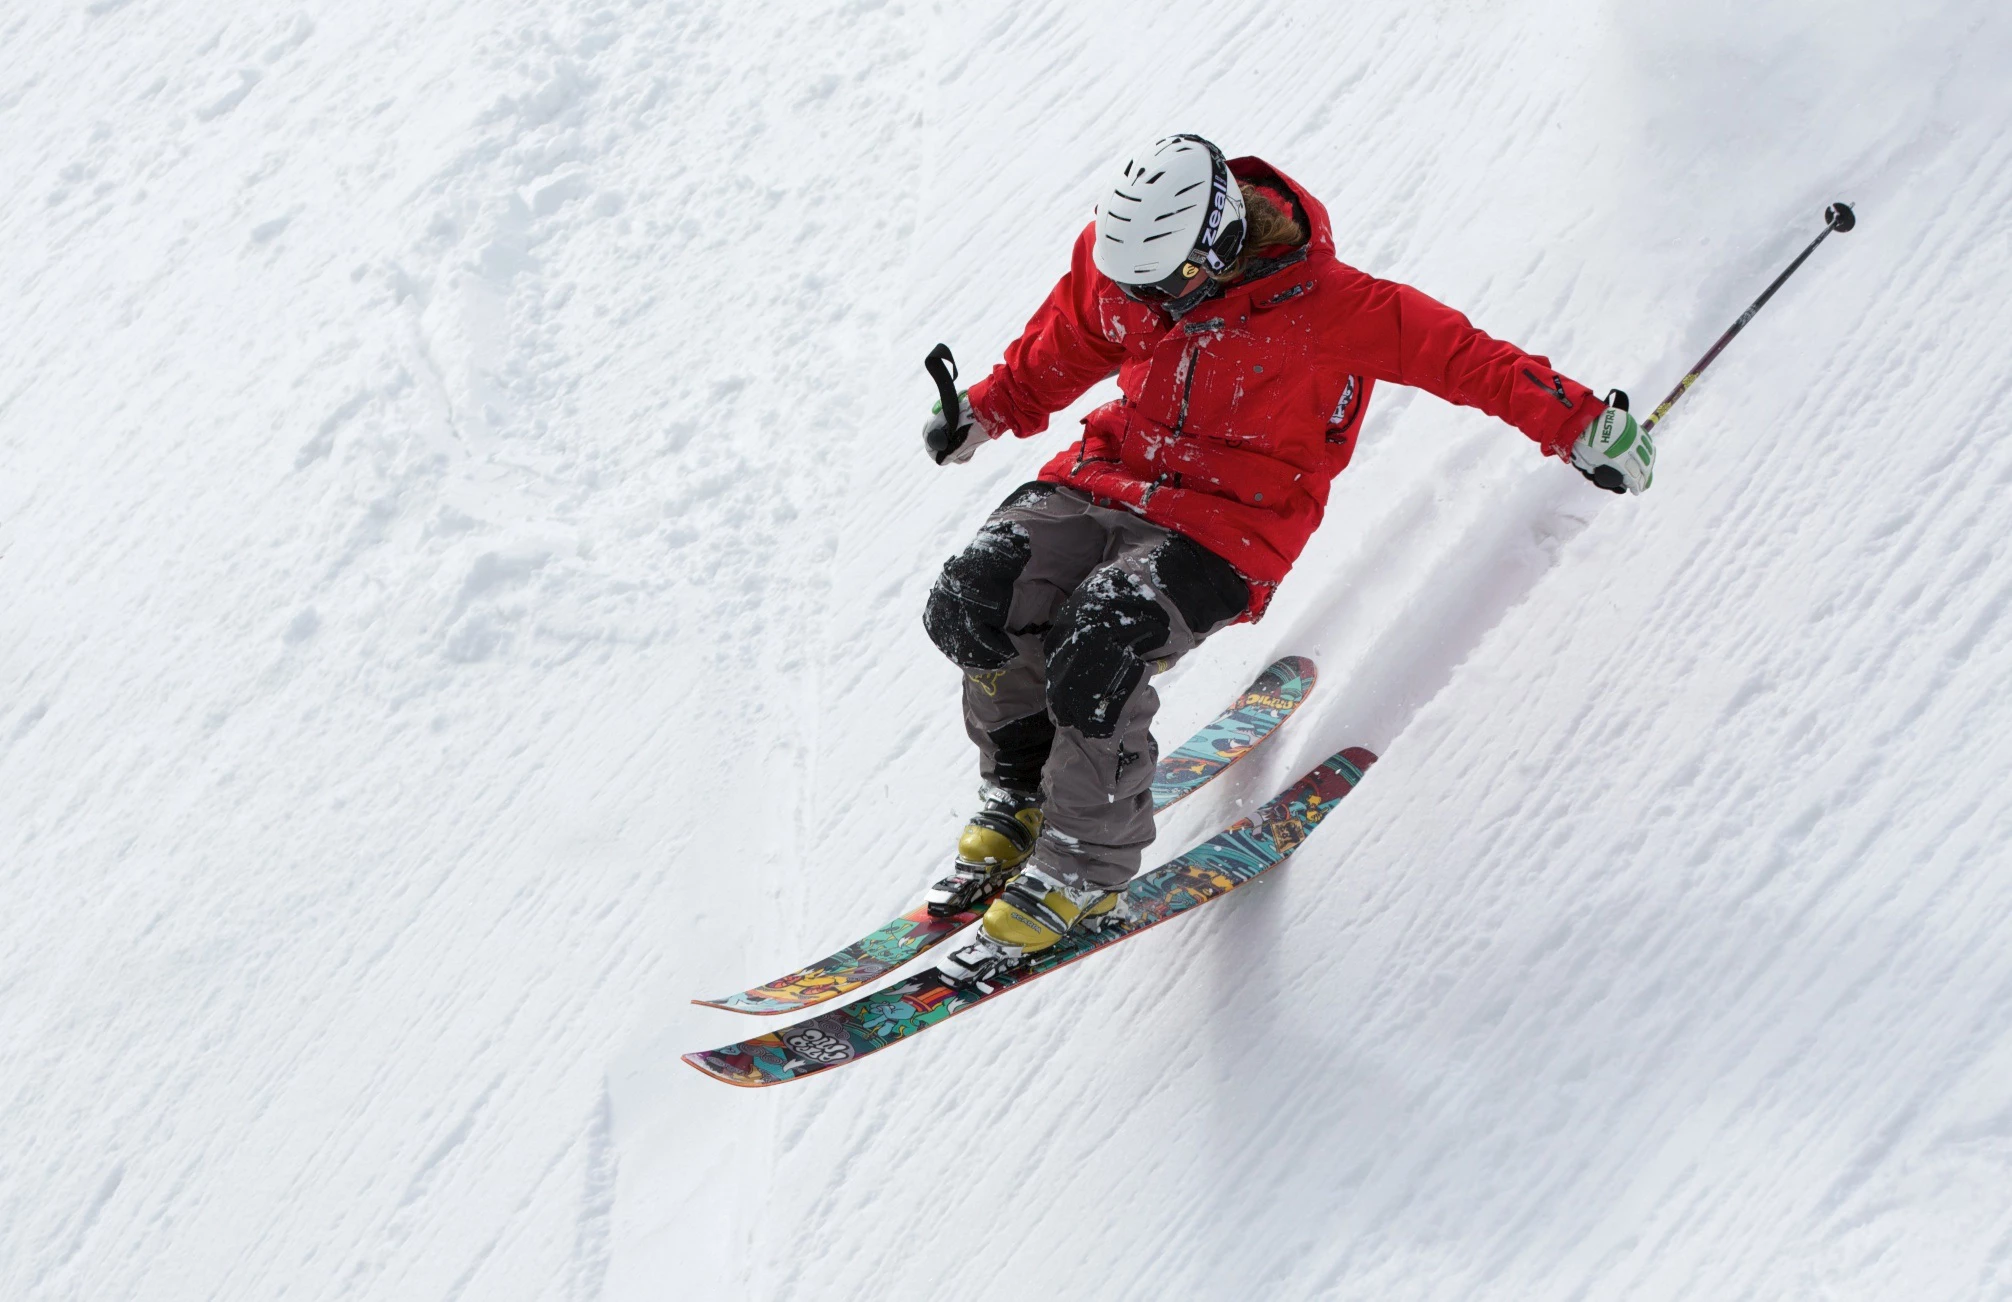 A skiier going at speed down a slope with snow launching into the air as he turns